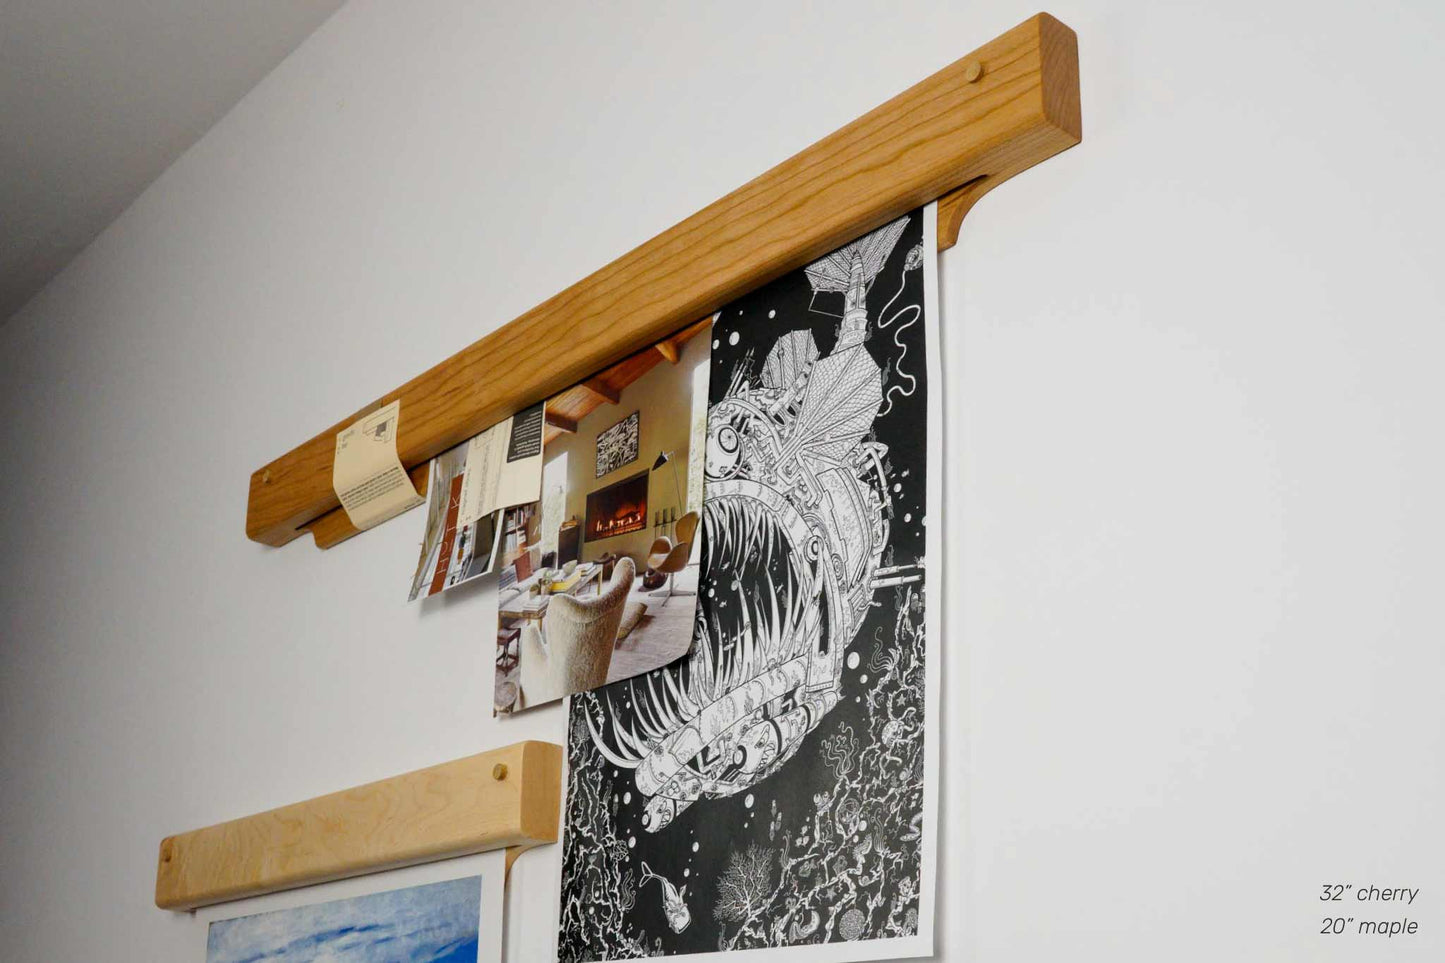 The Gravity Bar, by Biglow Woodcraft; a wooden holder for papers, pictures and images. Two wooden bar installed on a white wall, holding photos. Hardwood Maple and Cherry